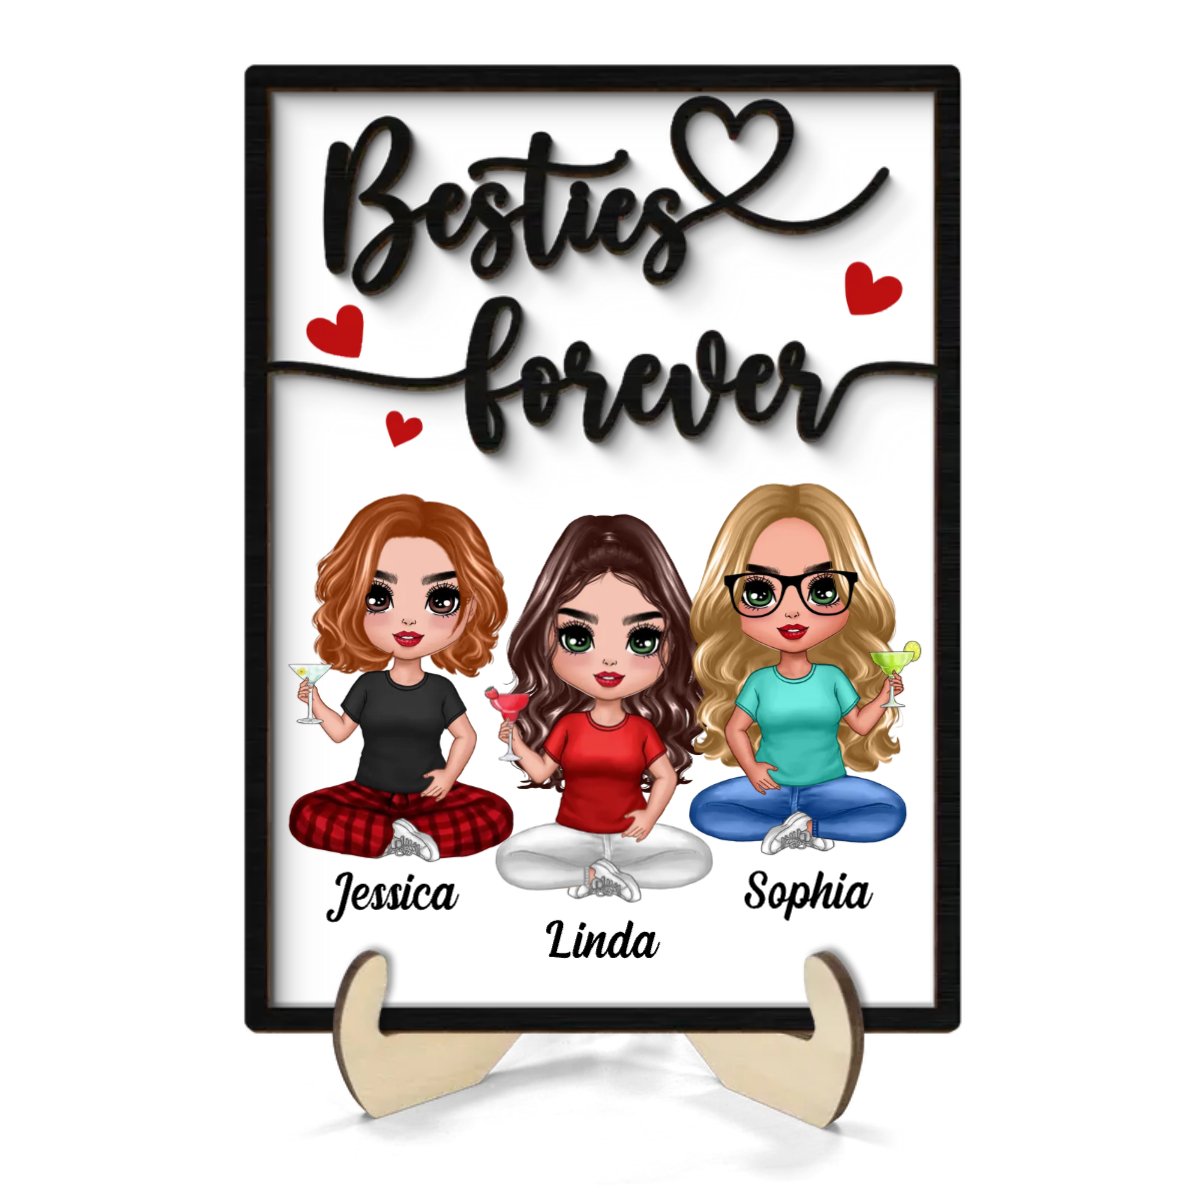 Besties - Besties Forever - Personalized Wooden Plaque (TL) - The Next Custom Gift